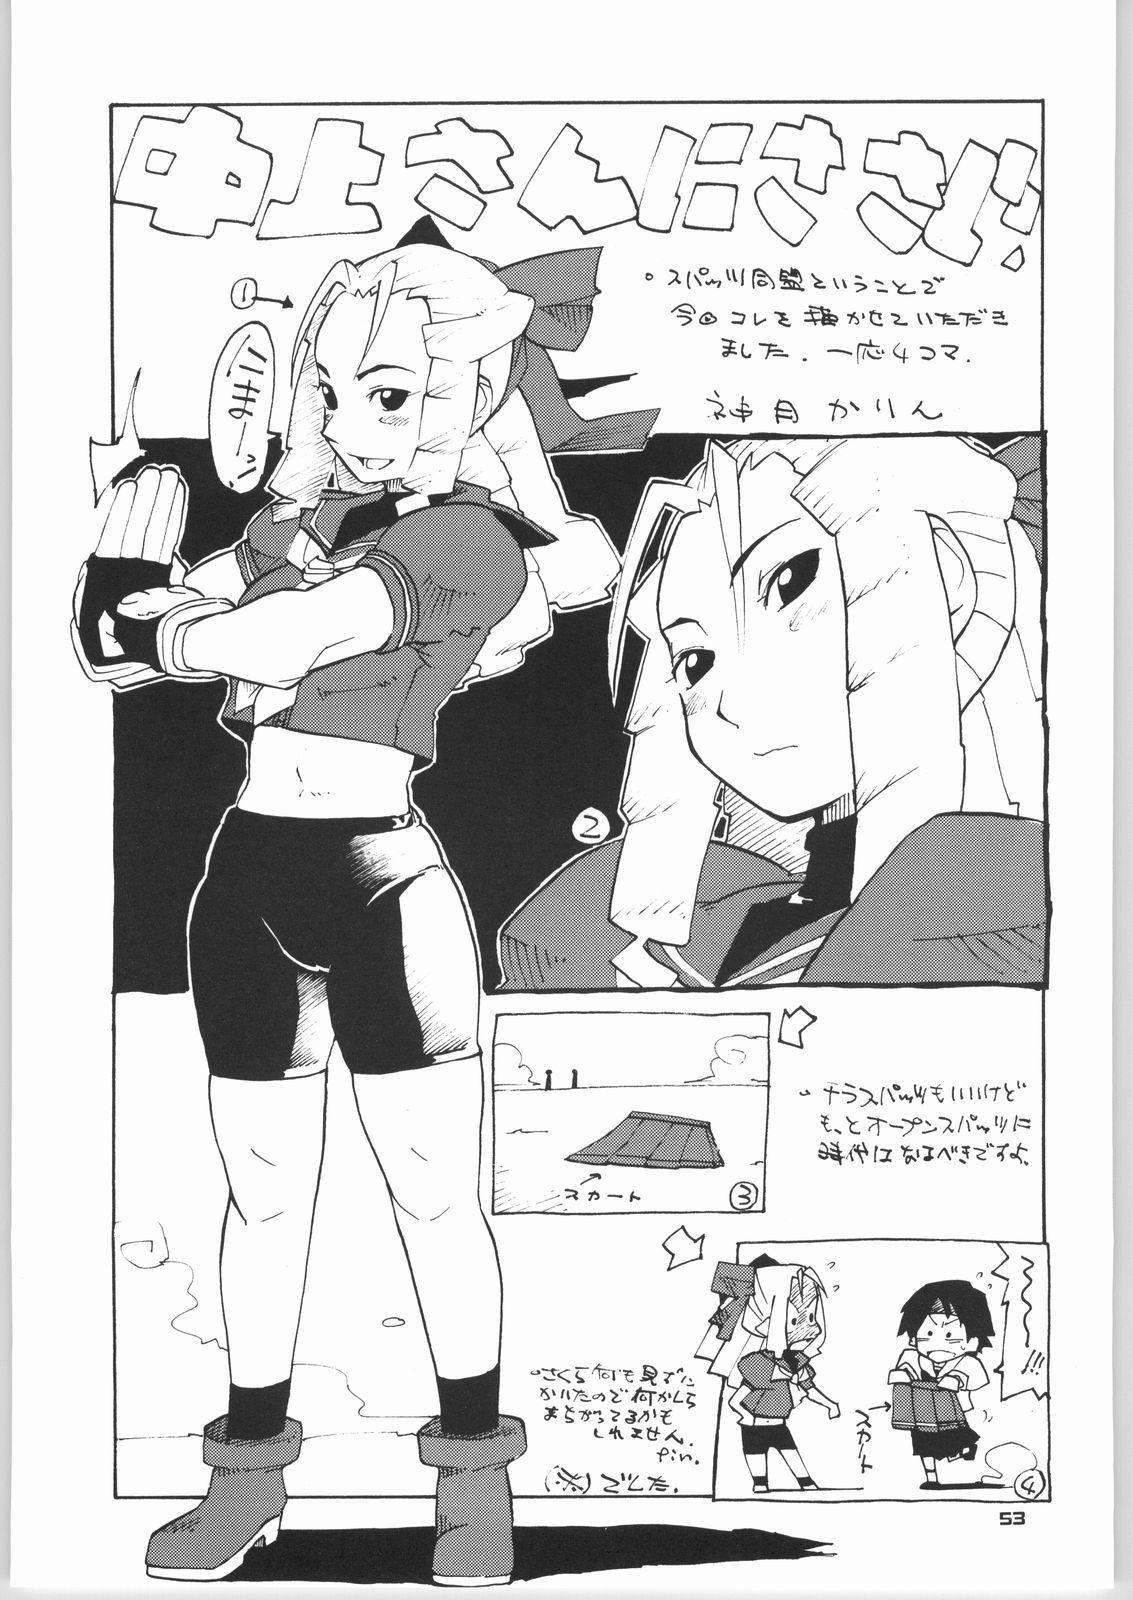 Spoon FIGHTING GIRLS - King of fighters Gaygroup - Page 52